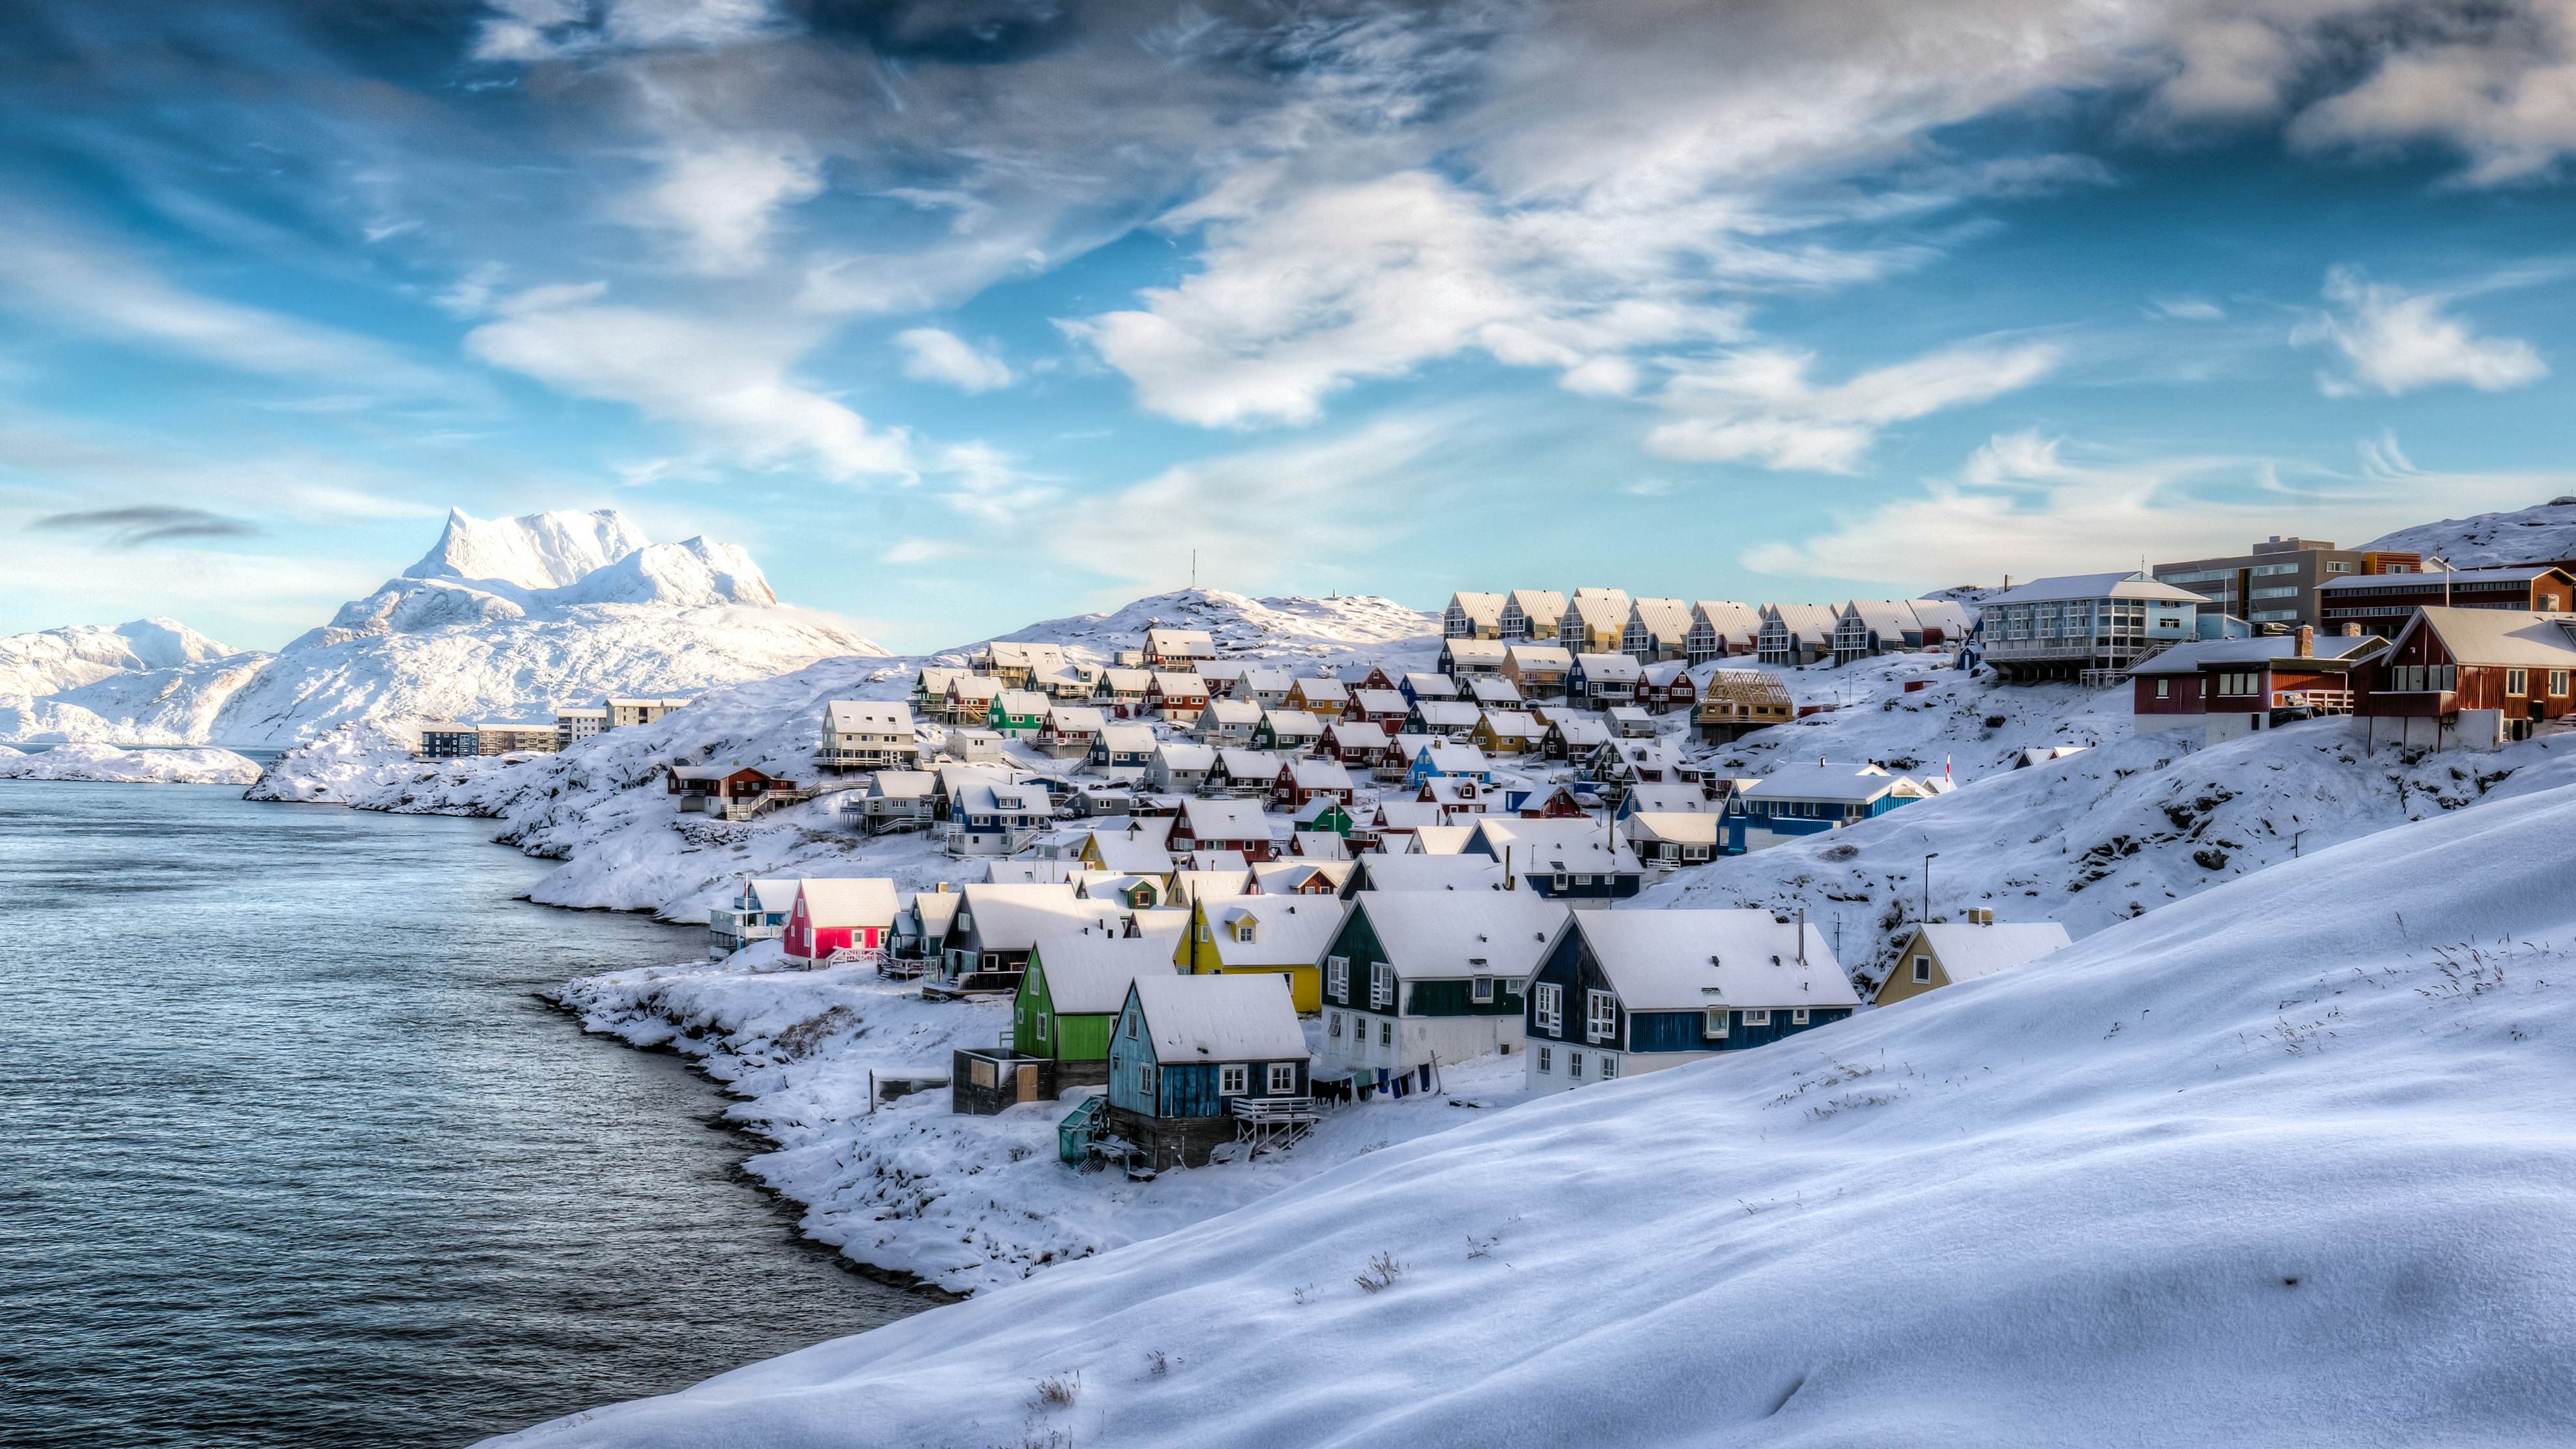 Village in Mosquito Valley, Nuuk, Greenland, during winter.